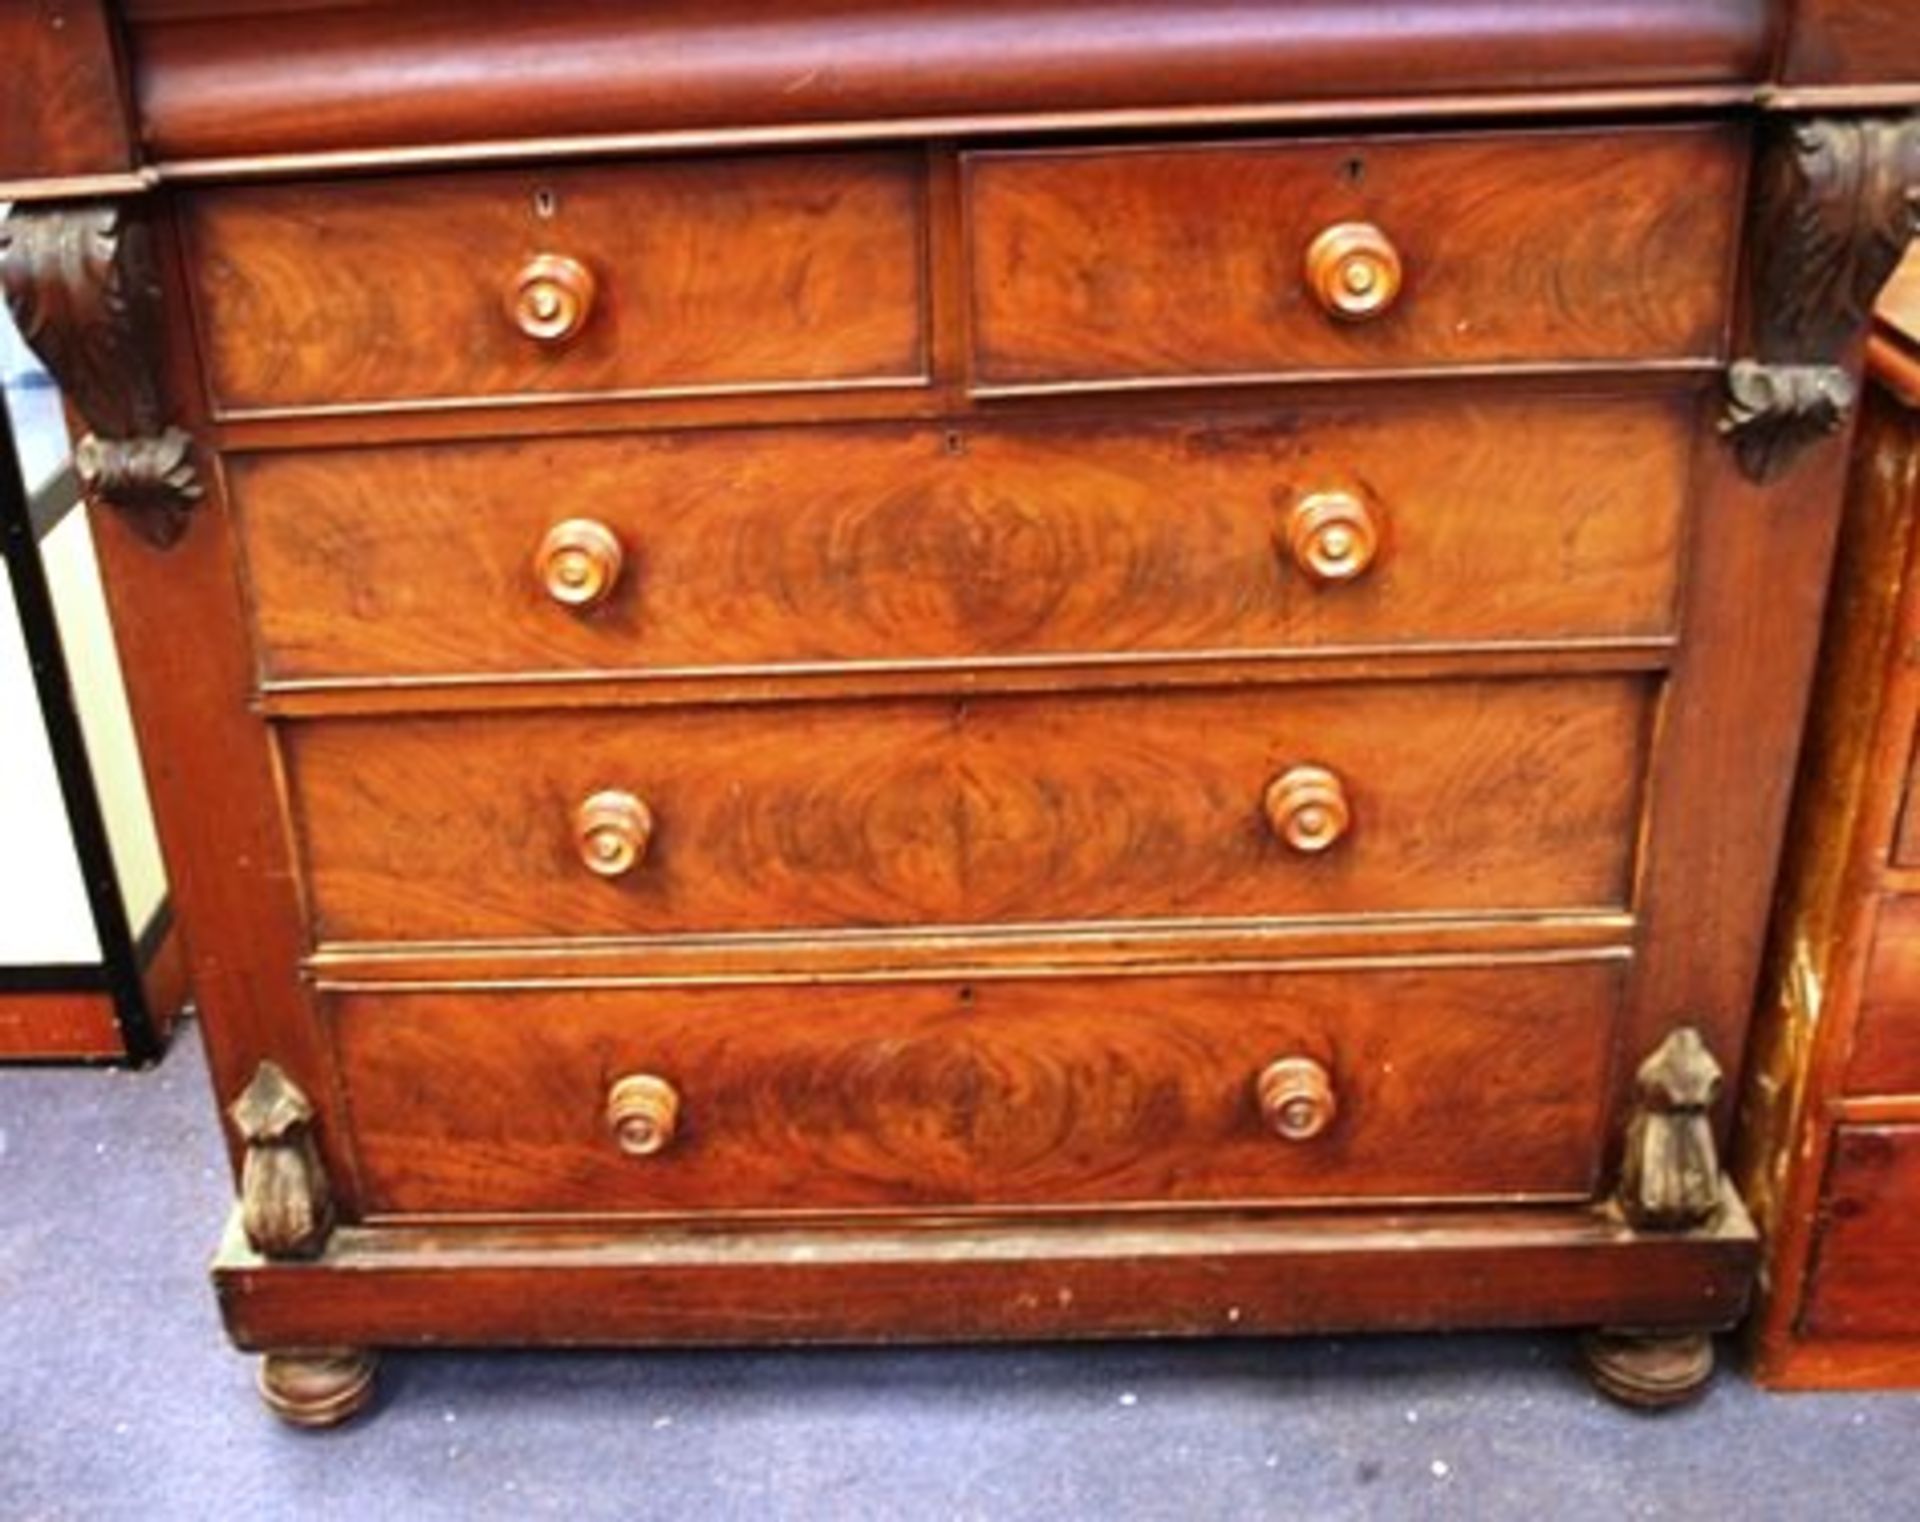 A large Victorian flared mahogany chest of drawers comprising 2 x short drawers and 3 x long